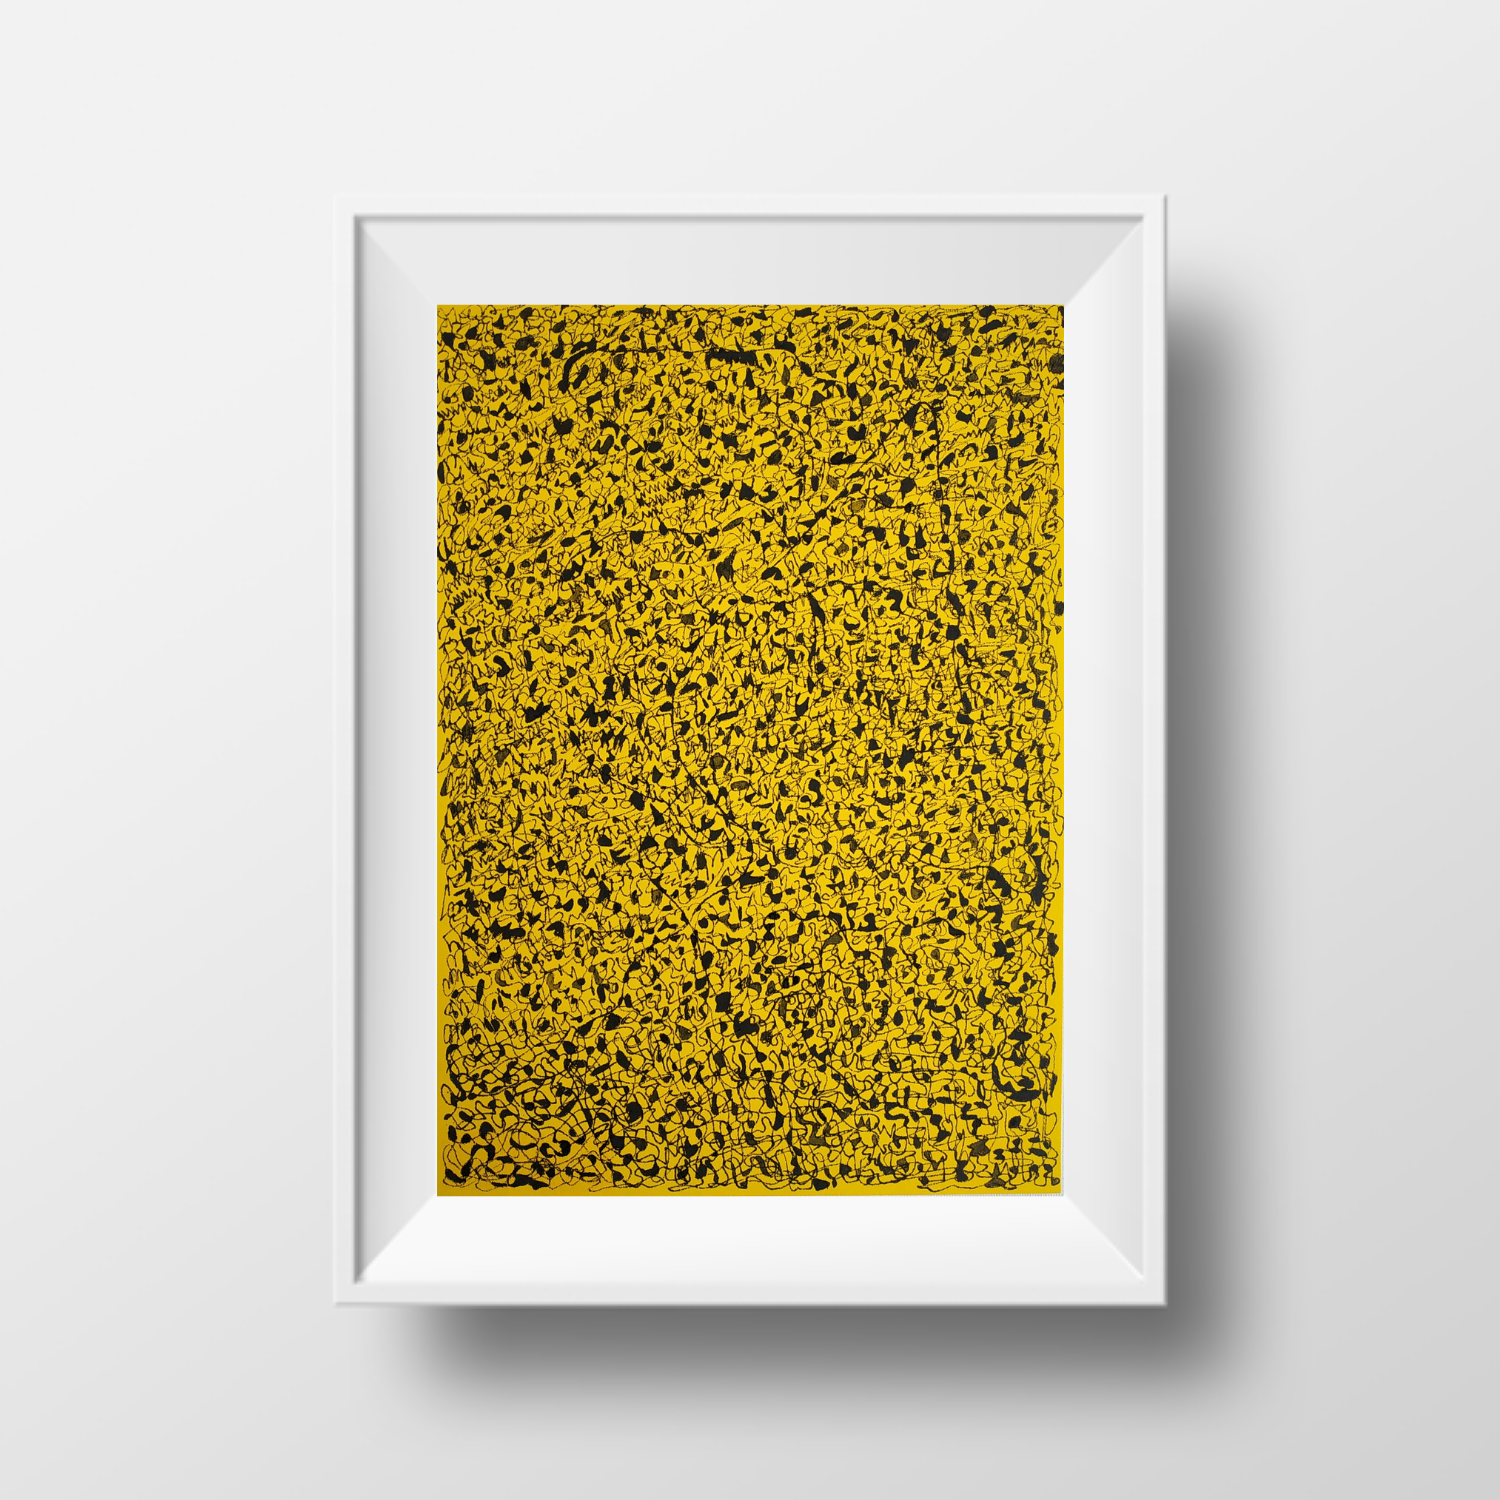 Black with Yellow Mosaic, 2021, ink on paper, 29,6*21 cm (A4 size)